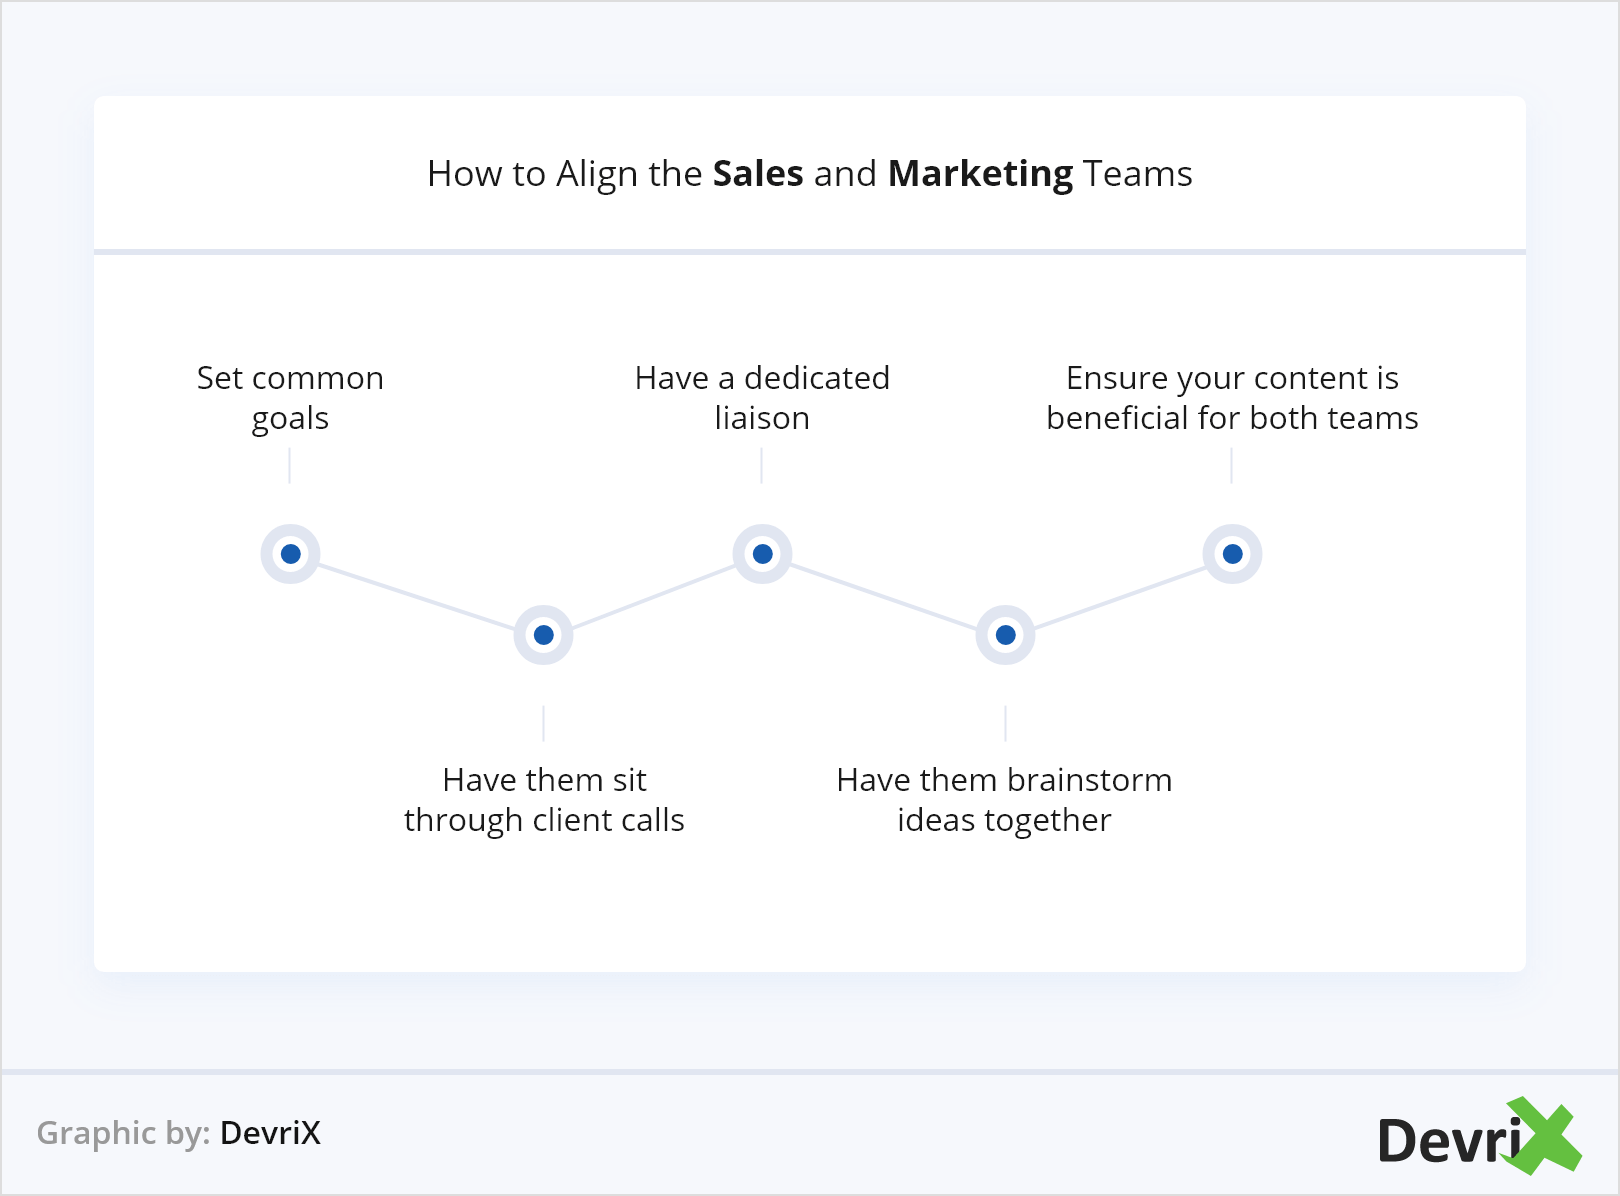 How to Align the Sales and Marketing Teams